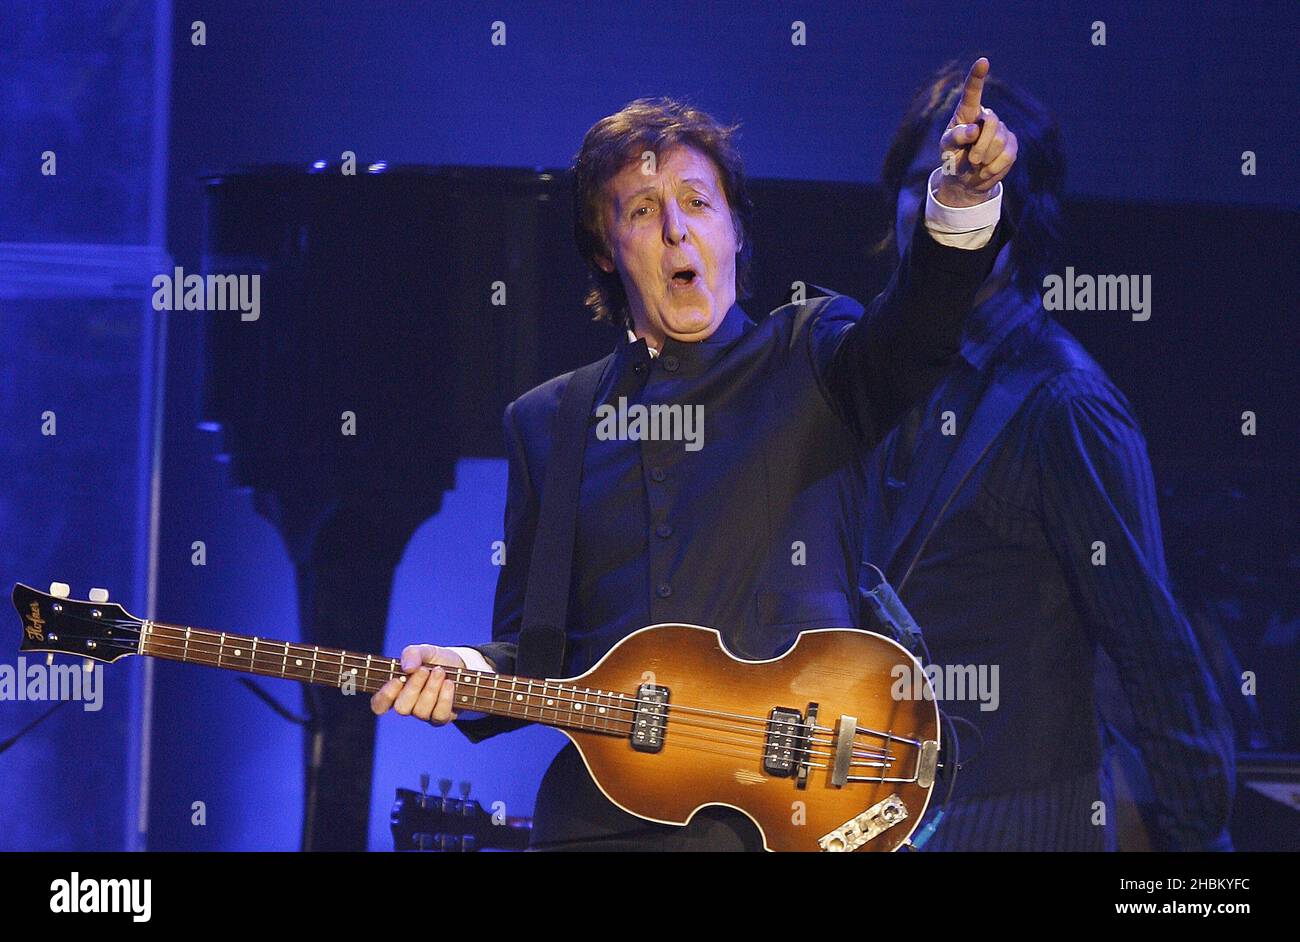 Paul McCartney performs at the 02 Arena, London. Stock Photo